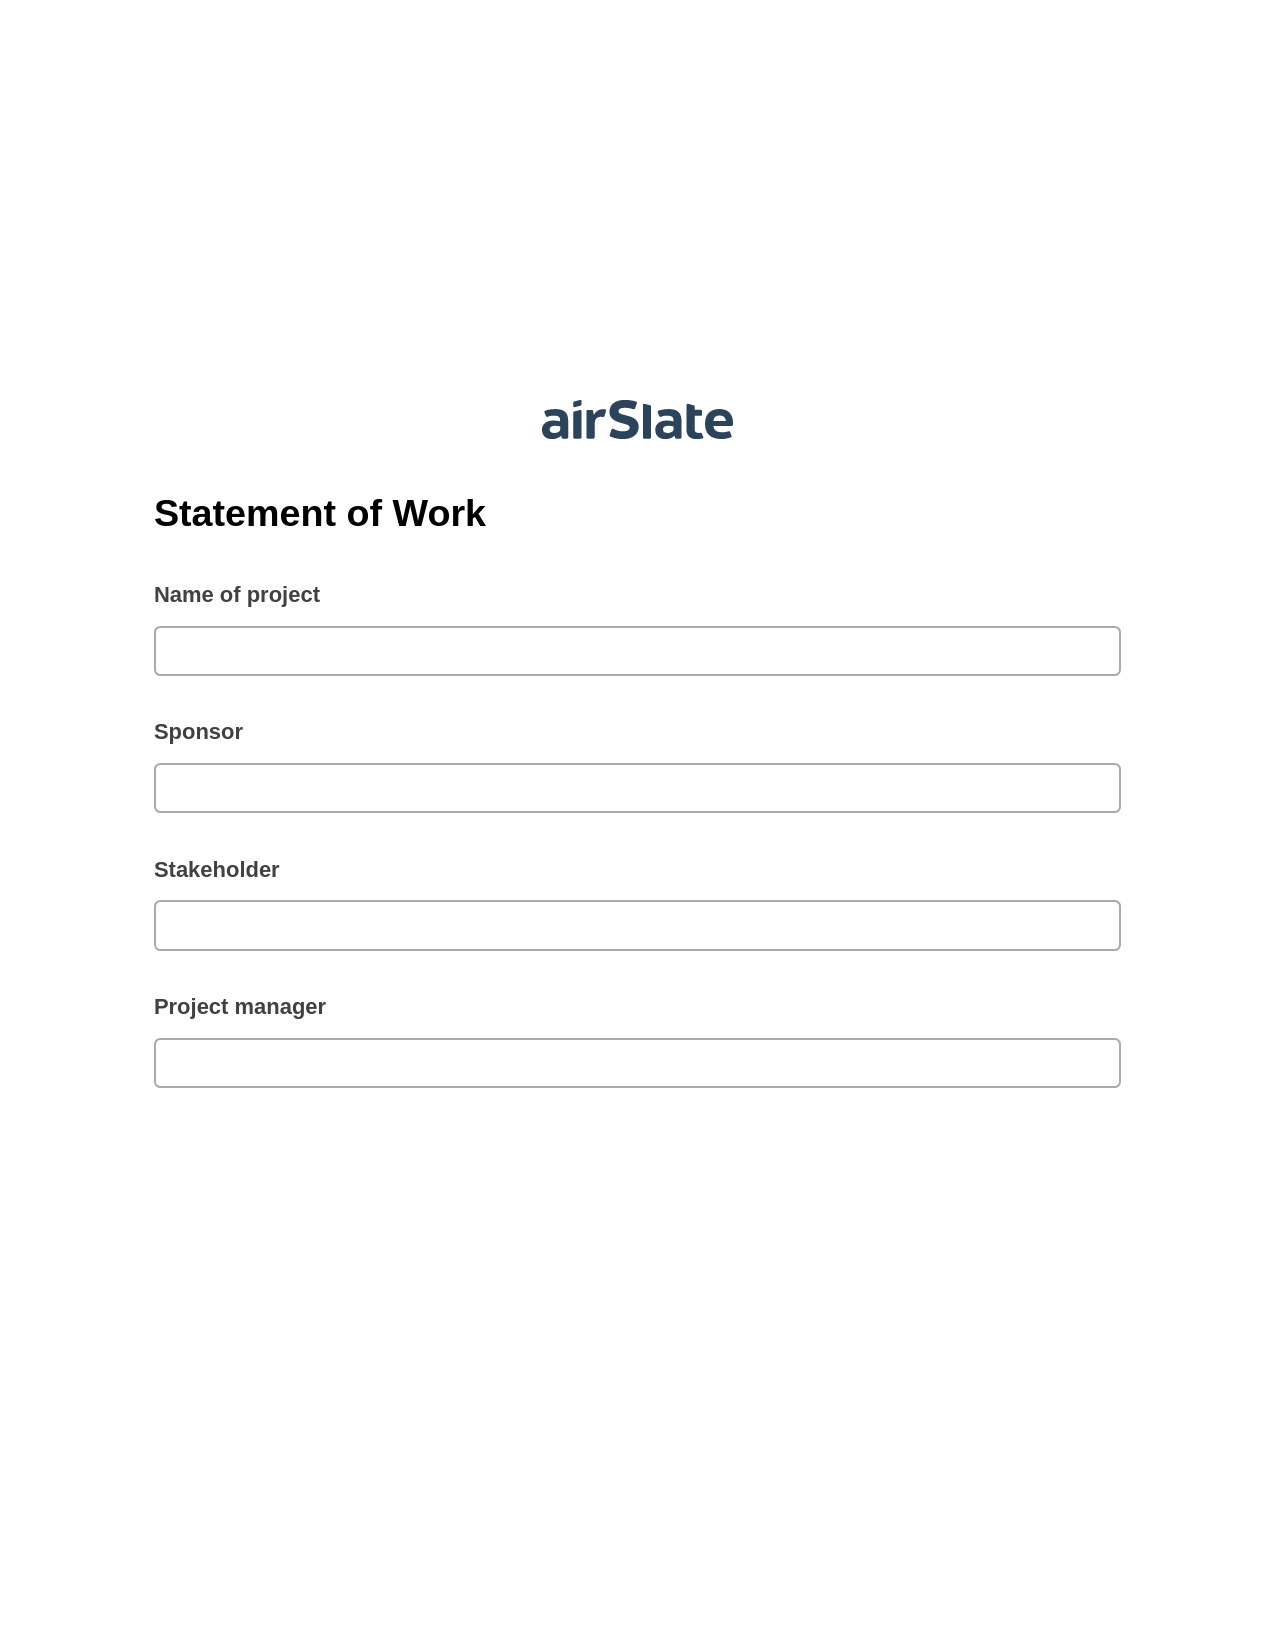 Statement of Work Pre-fill from Salesforce Records with SOQL Bot, Reminder Bot, Box Bot